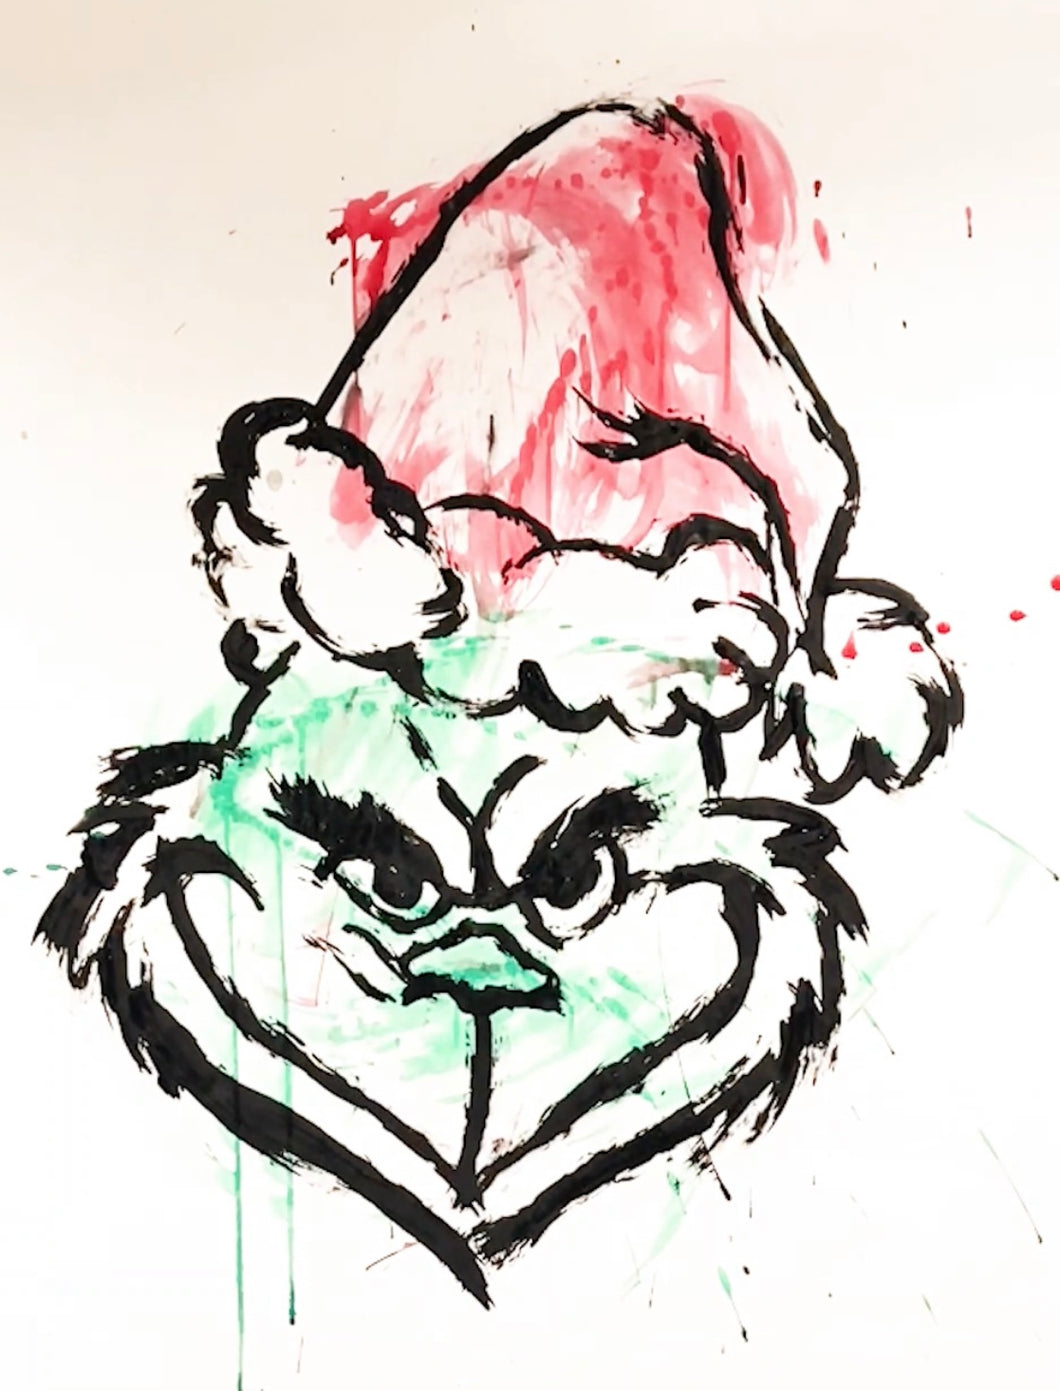 The Grinch 4ft x 5ft finger painting